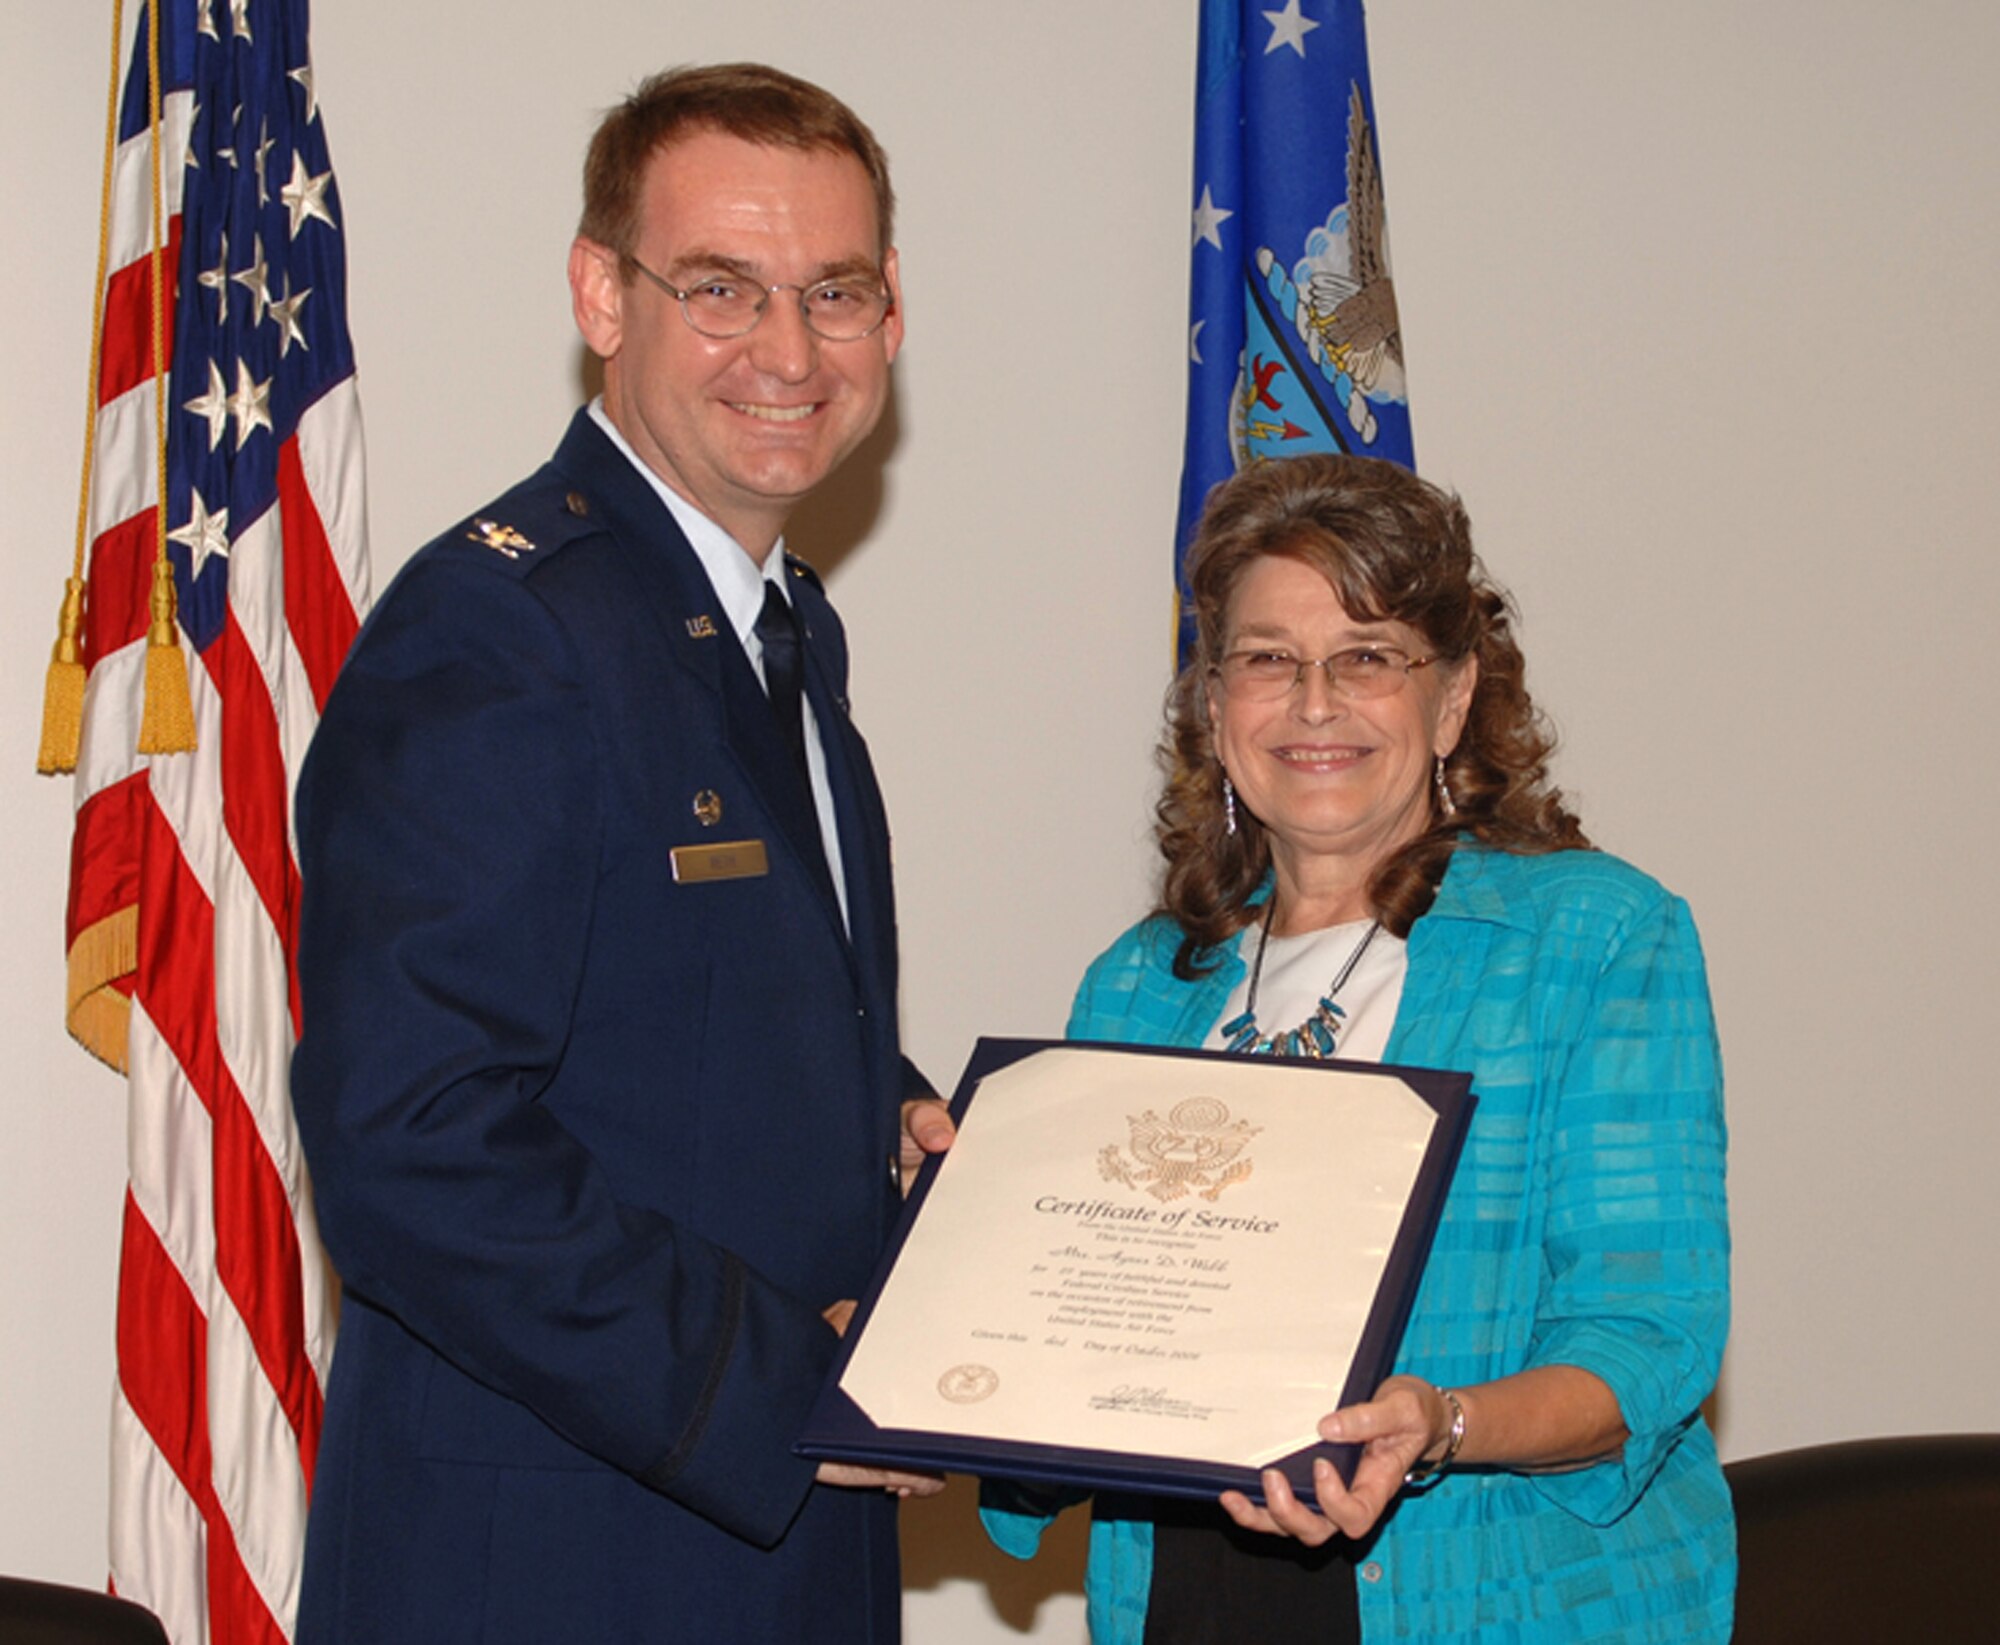 Agnes Webb, 14th Operations Group Budget Analyst, accepts her Certificate of Service from Col. David Reth, 14th Operations Group commander. Mrs. Webb retired Oct. 1 after 27 years of service to Columbus AFB. (U.S. Air Force photo by Elizabeth Owens)